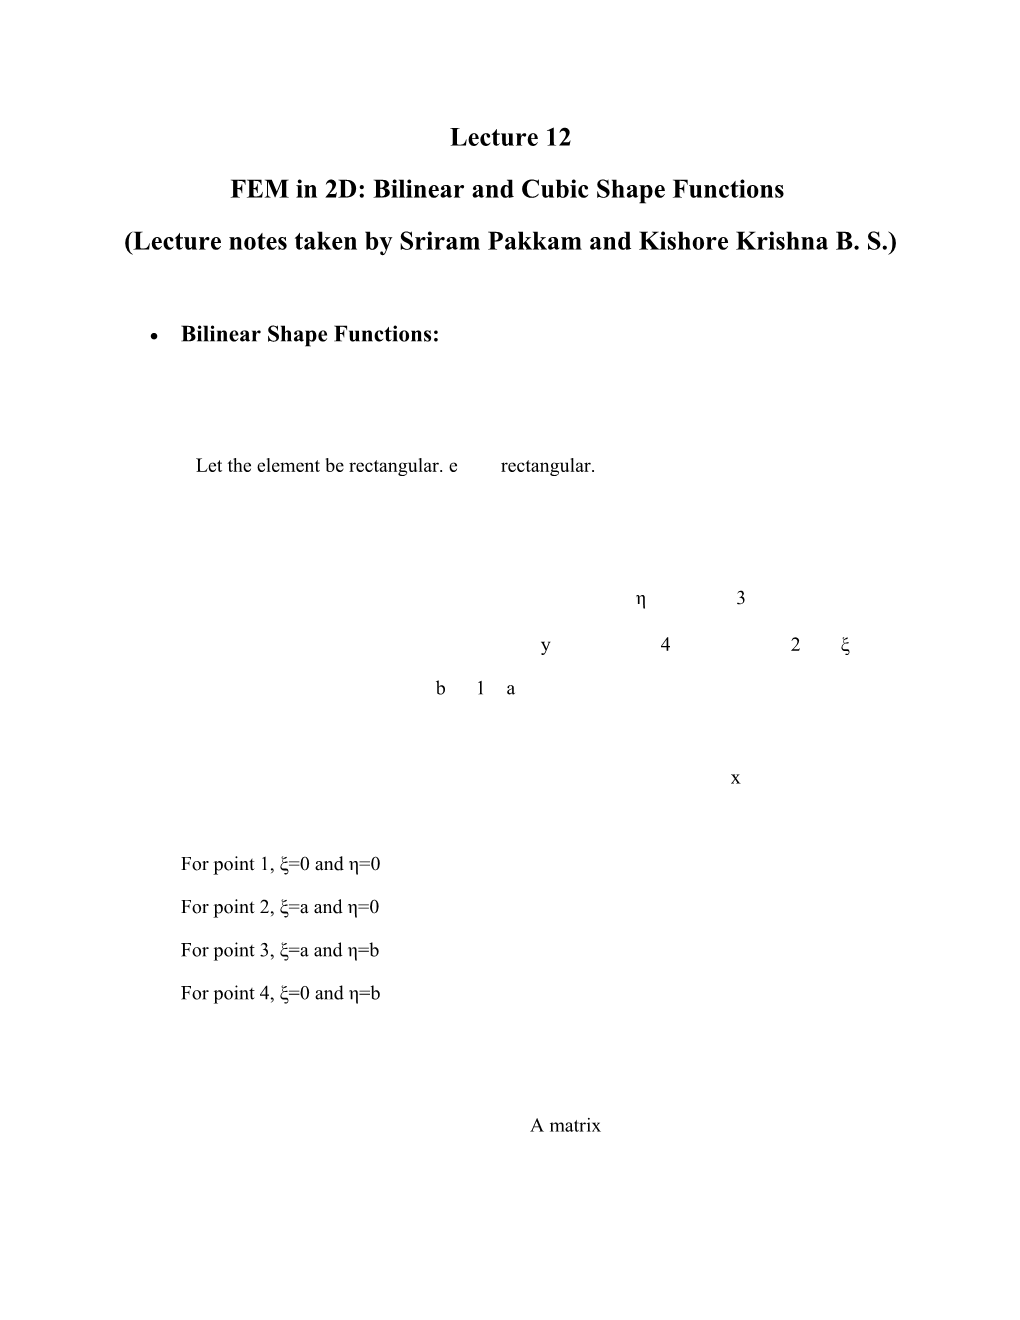 FEM in 2D: Bilinear and Cubic Shape Functions